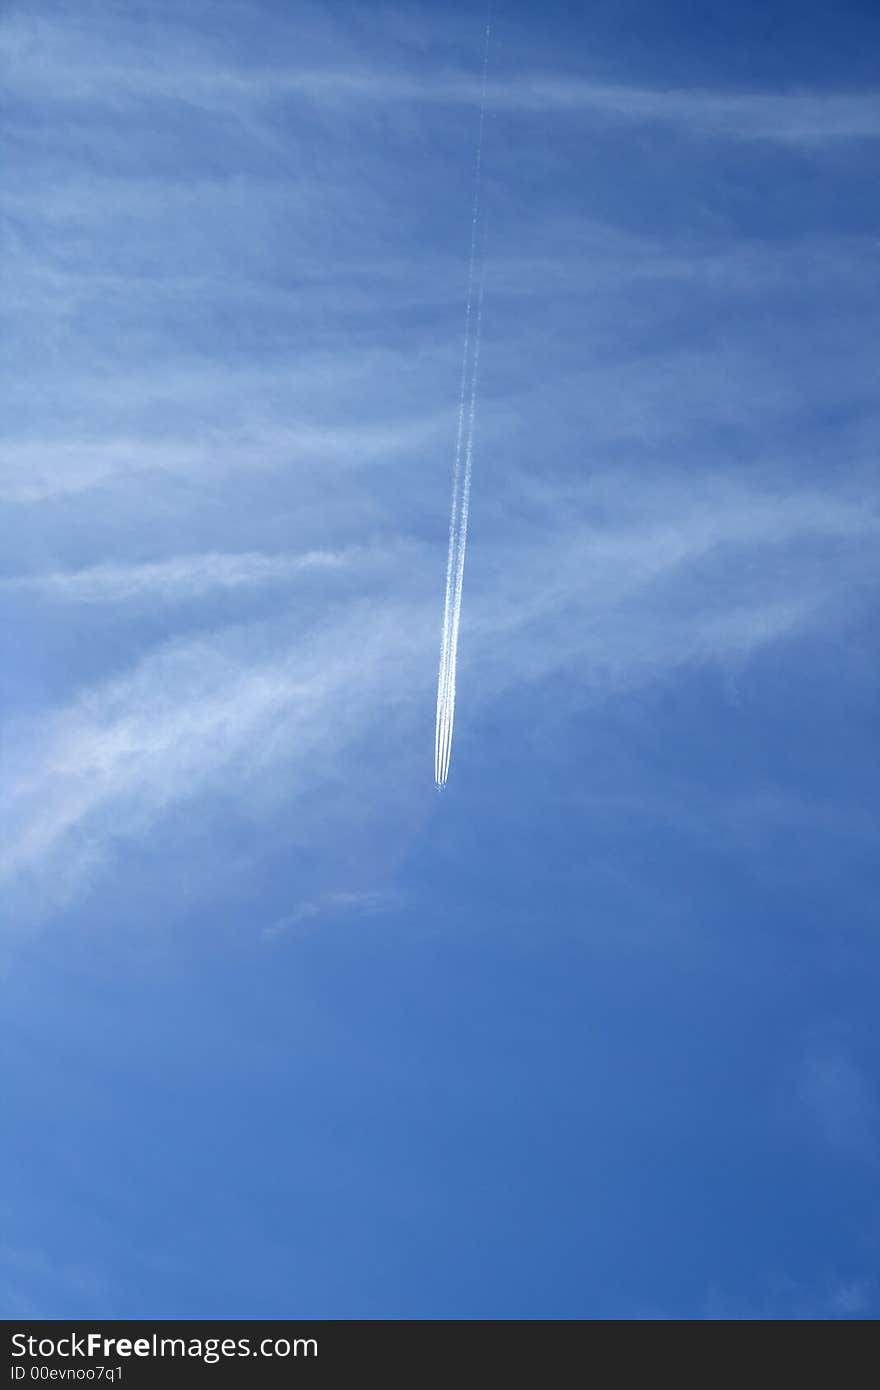 Trace of a jet airplane crossing the sky like a comet. Trace of a jet airplane crossing the sky like a comet.